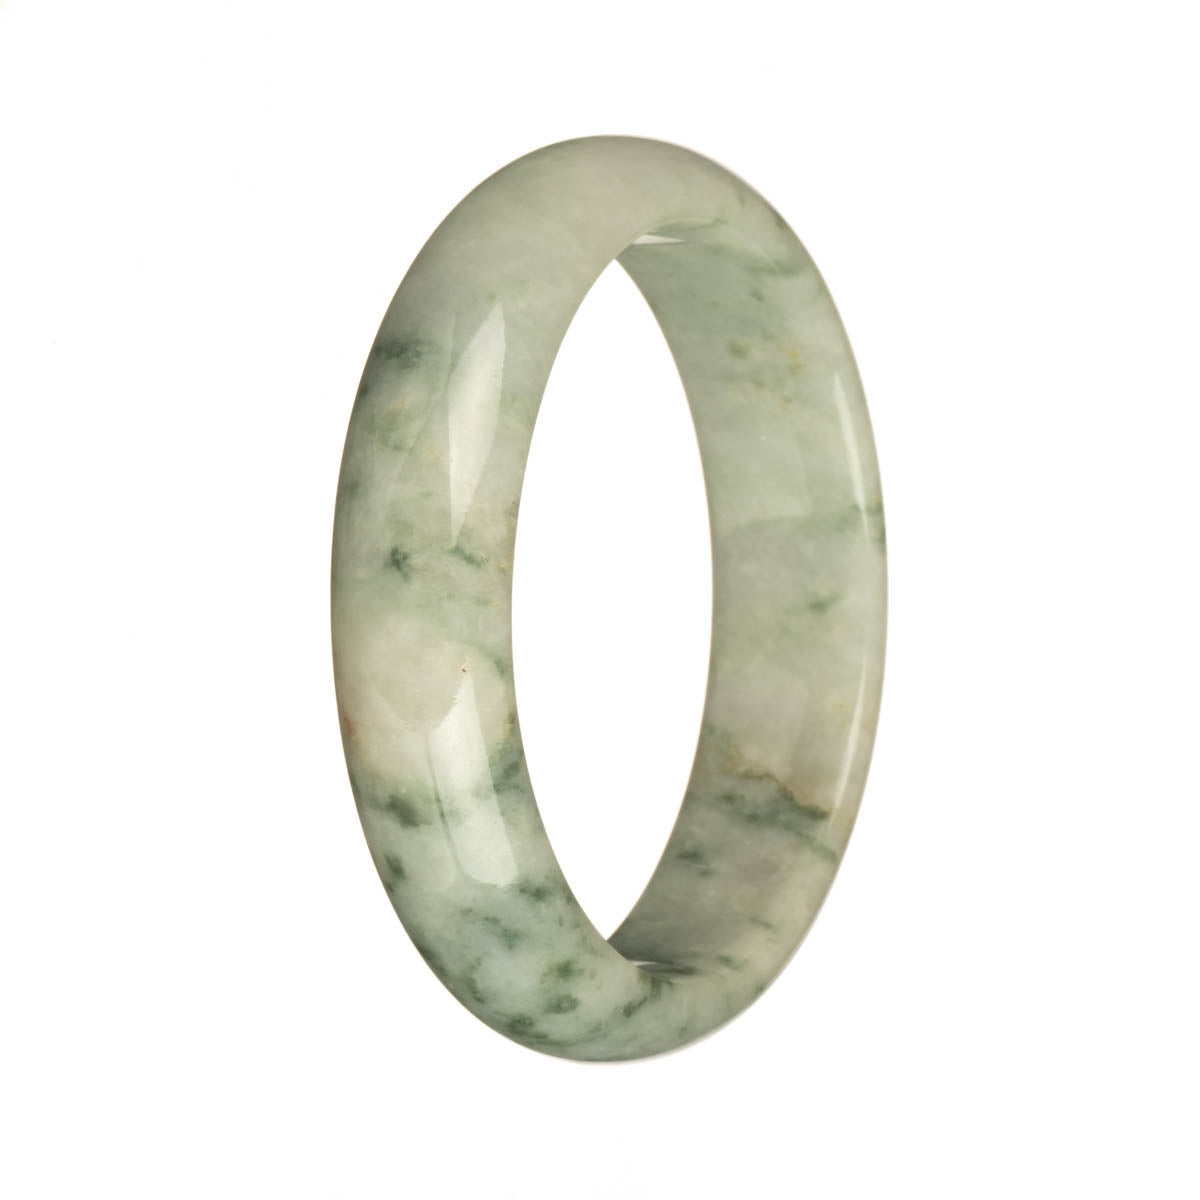 Real Natural White with Green Patterns and Red Spots Burma Jade Bracelet - 58mm Half Moon